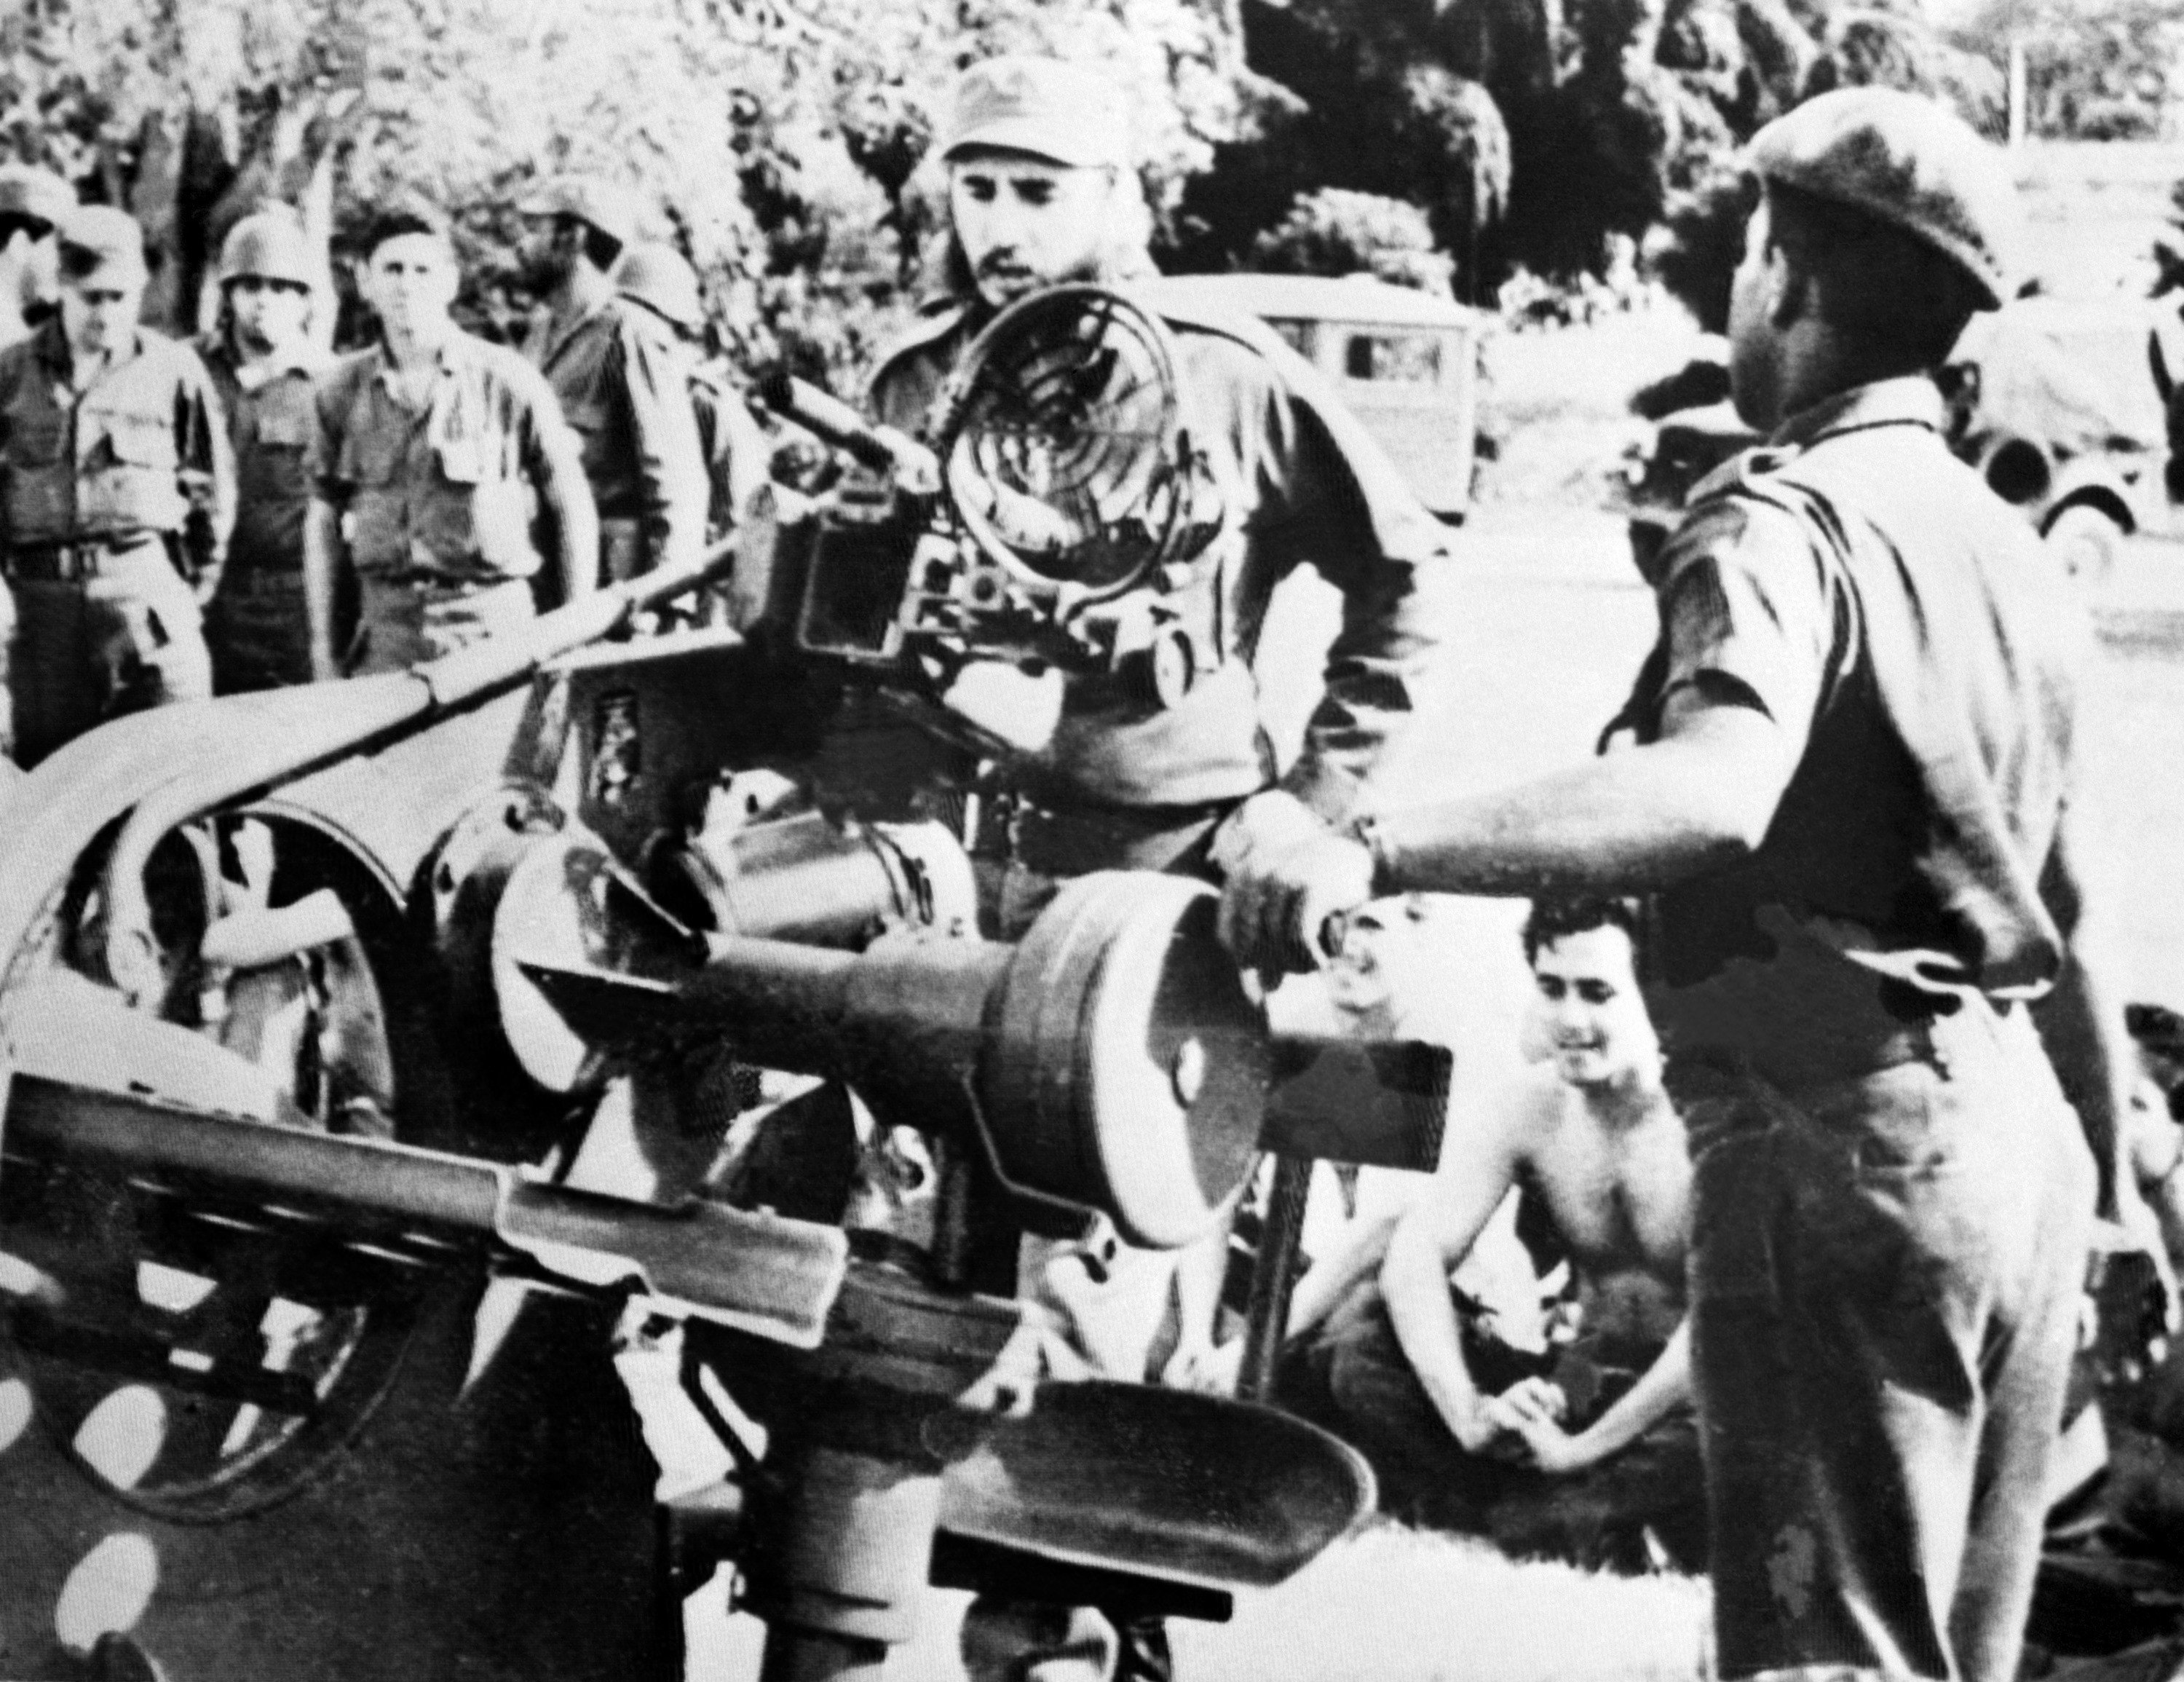 Cuban leader Fidel Castro (centre) inspects weapons at a military base on November 2, 1962, during the missile crisis. The crisis represented the closest point the world had come to nuclear warfare after the second world war. Photo: AFP